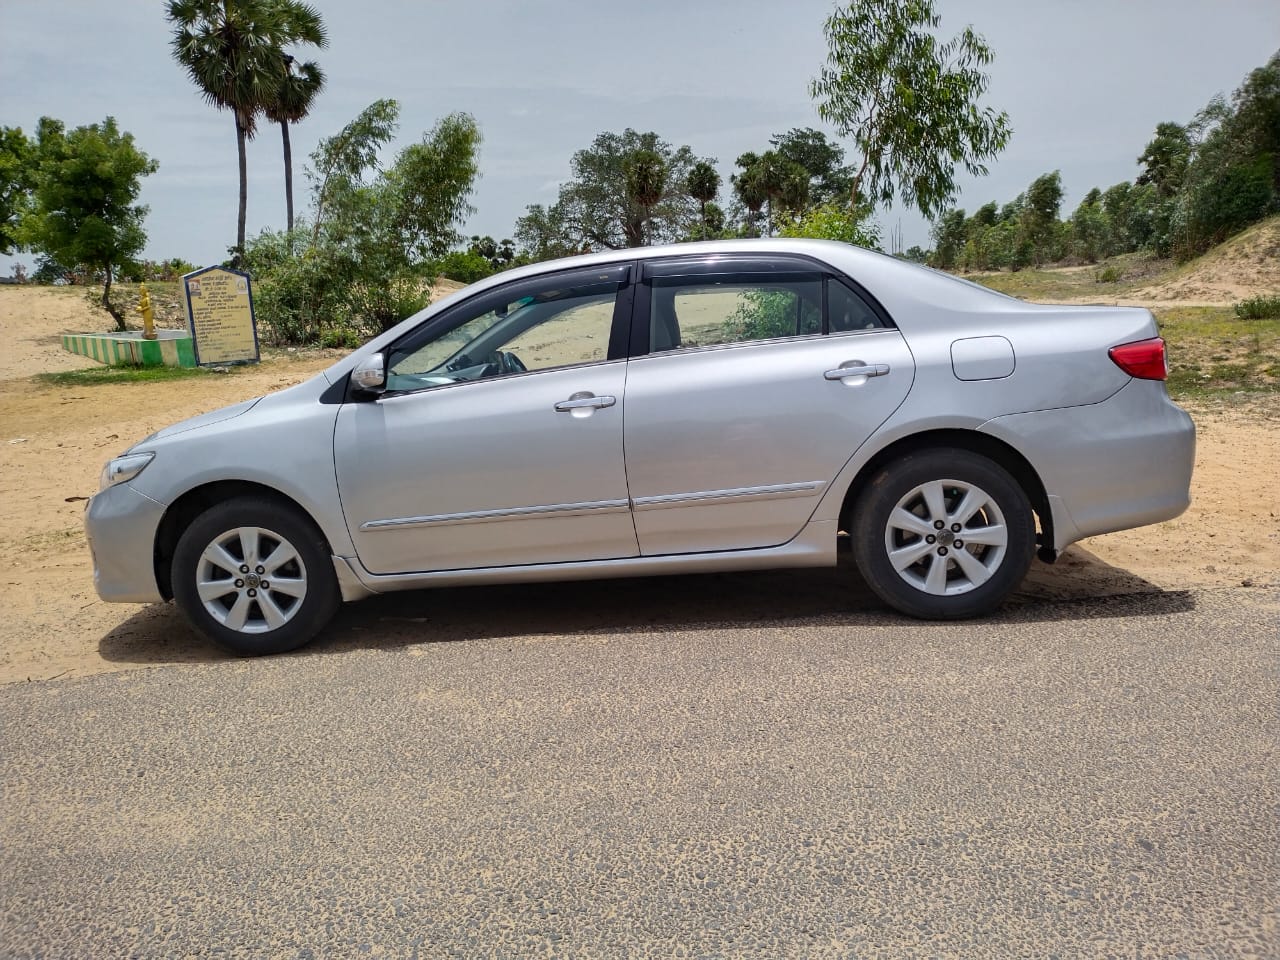 3853-for-sale-Toyota-Corolla-Altis-Diesel-First-Owner-2013-TN-registered-rs-0